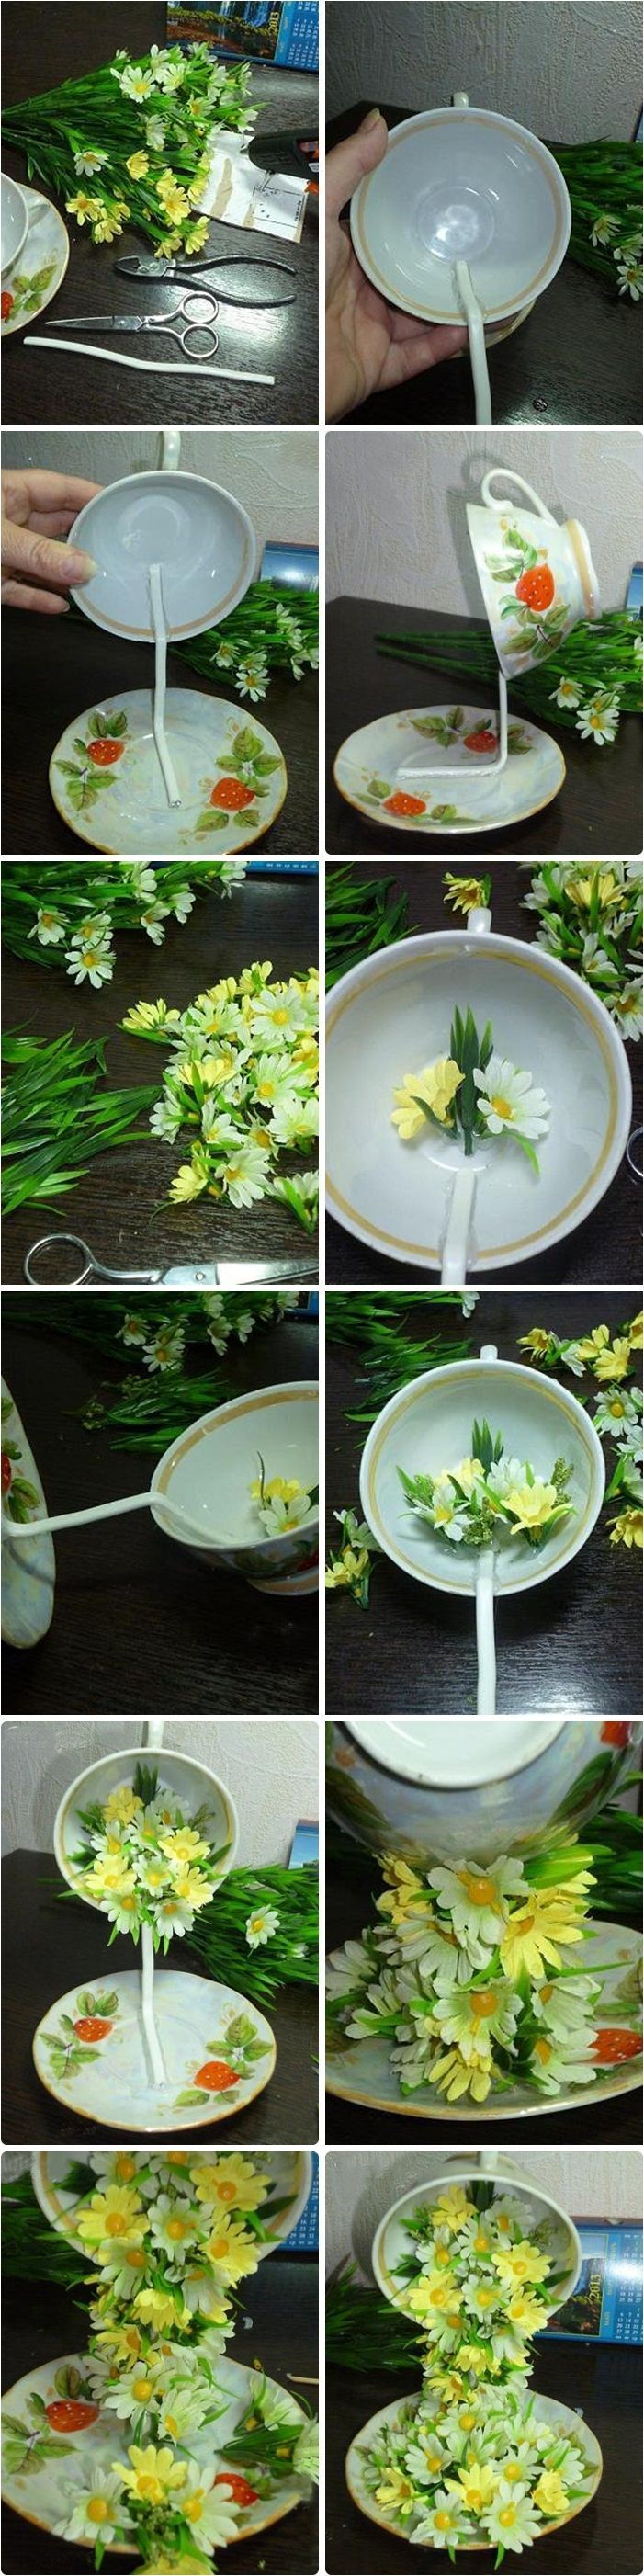 Tea Cup Floral Cascade ~ step by step tutorial on how to create the illusion of flowers spilling into a saucer from a “floating”